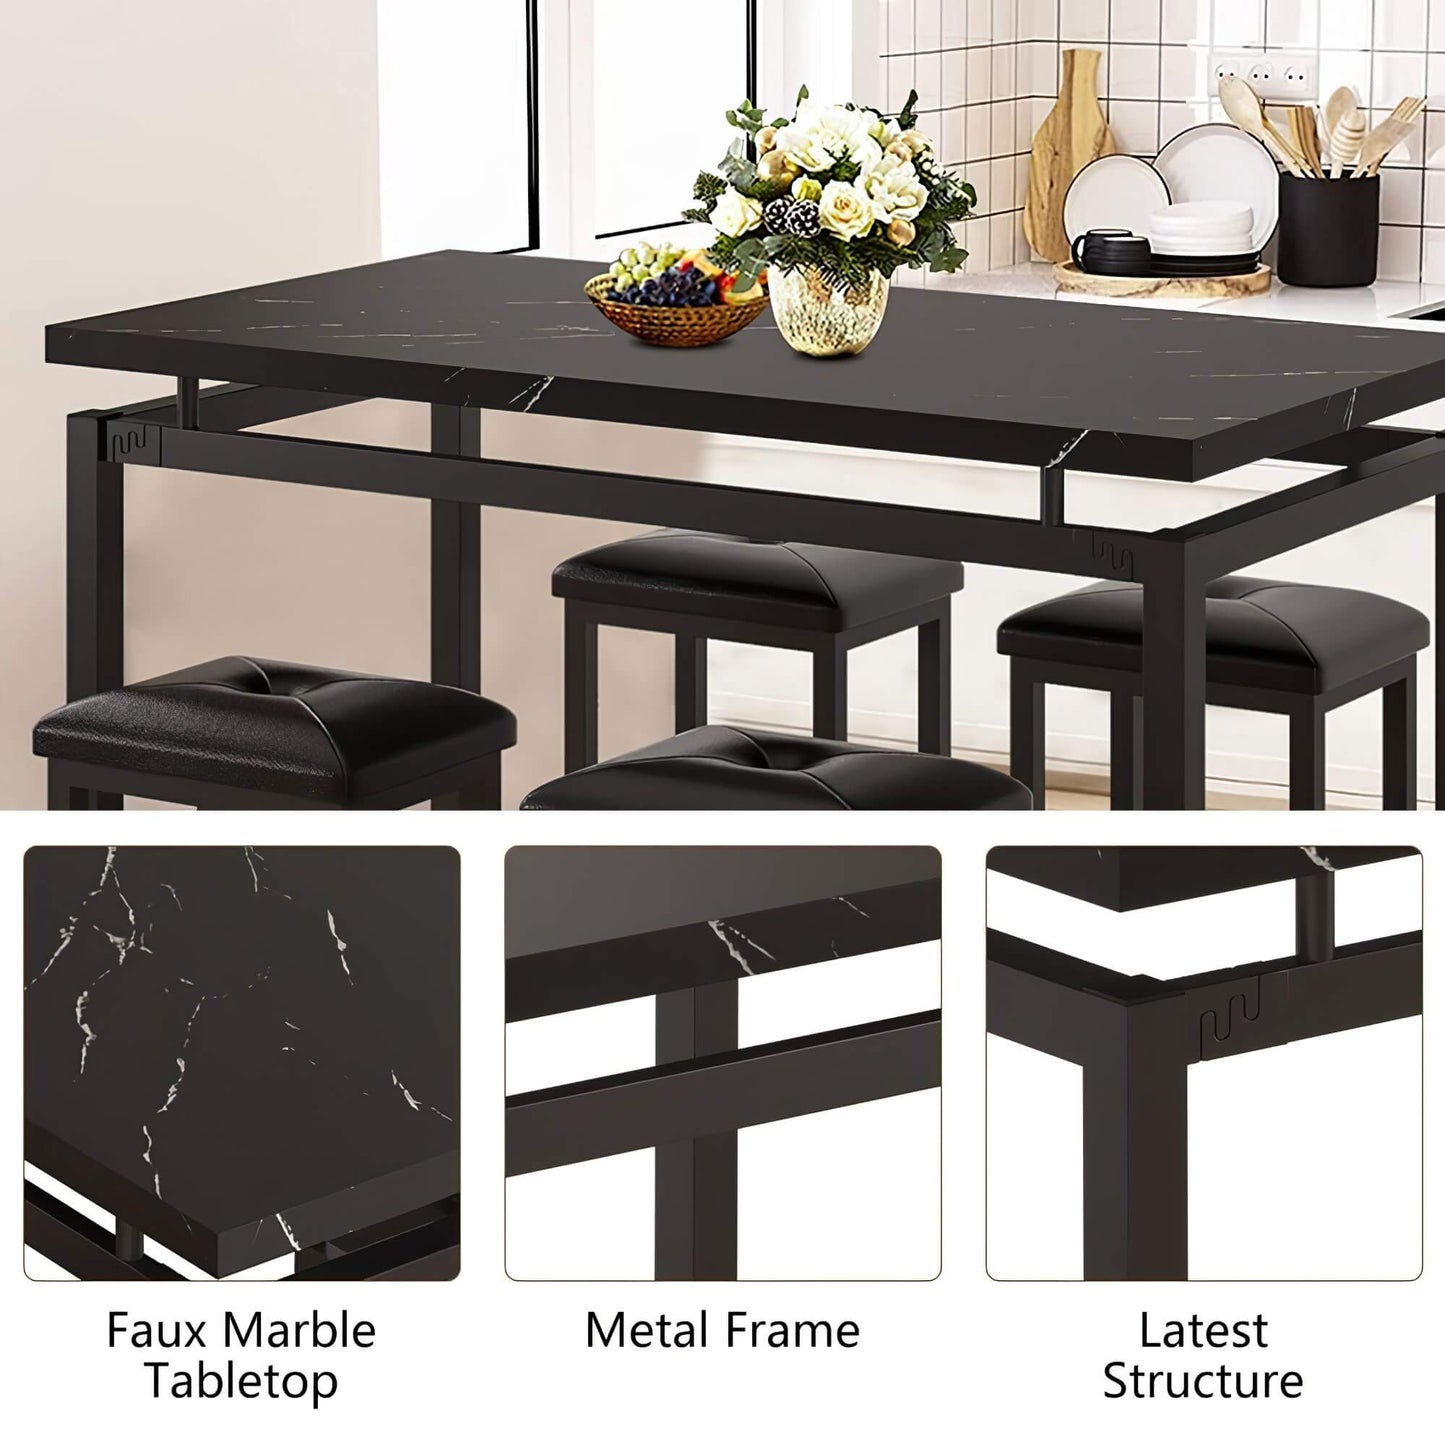 Compelling Marble Dining Set for 4 | Exceptional 5-Piece Wood & Metal Bar Table Set with 4 Upholstered Chairs